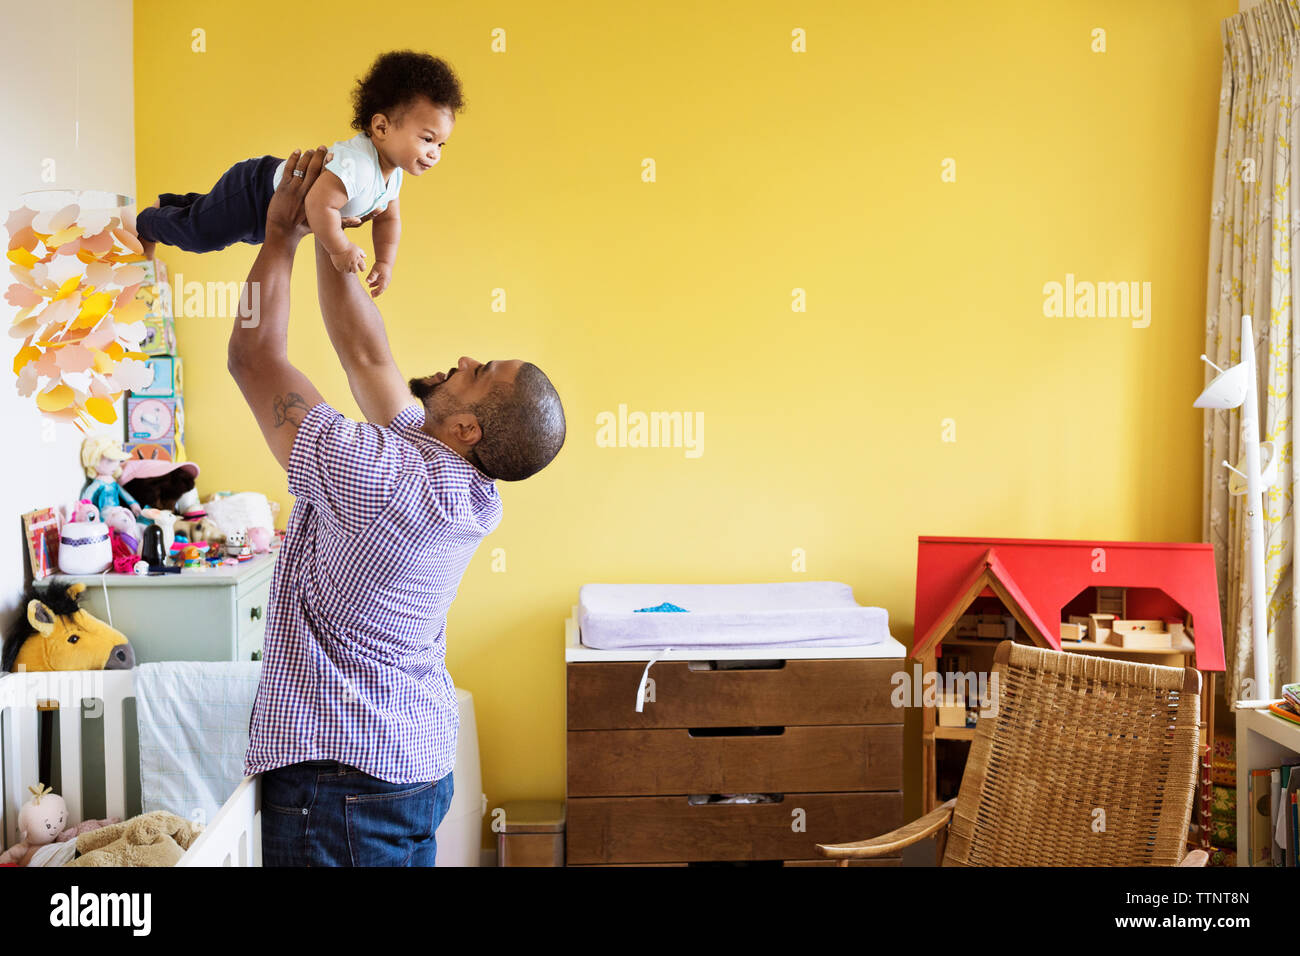 Happy man picking up son while standing at home Stock Photo